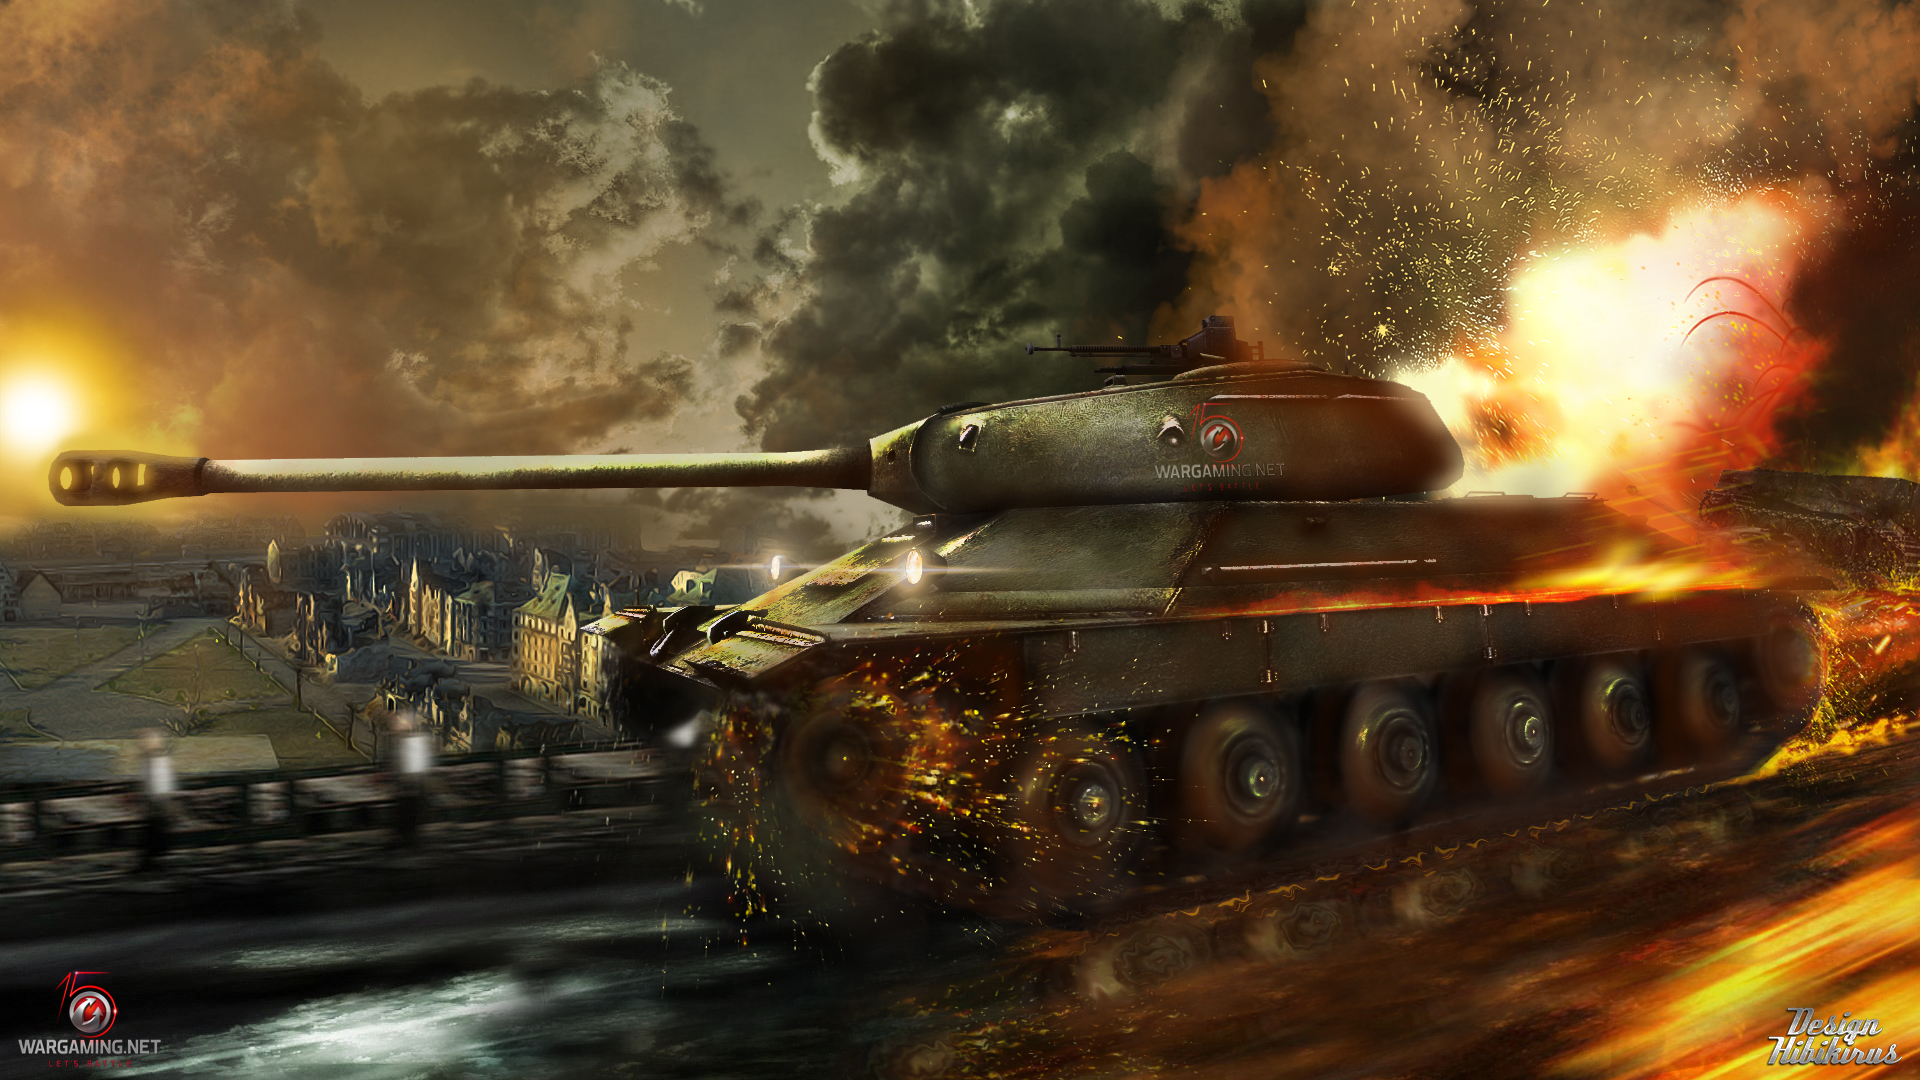 Of Tanks No One Can Stop The Tank Wallpaper And Image